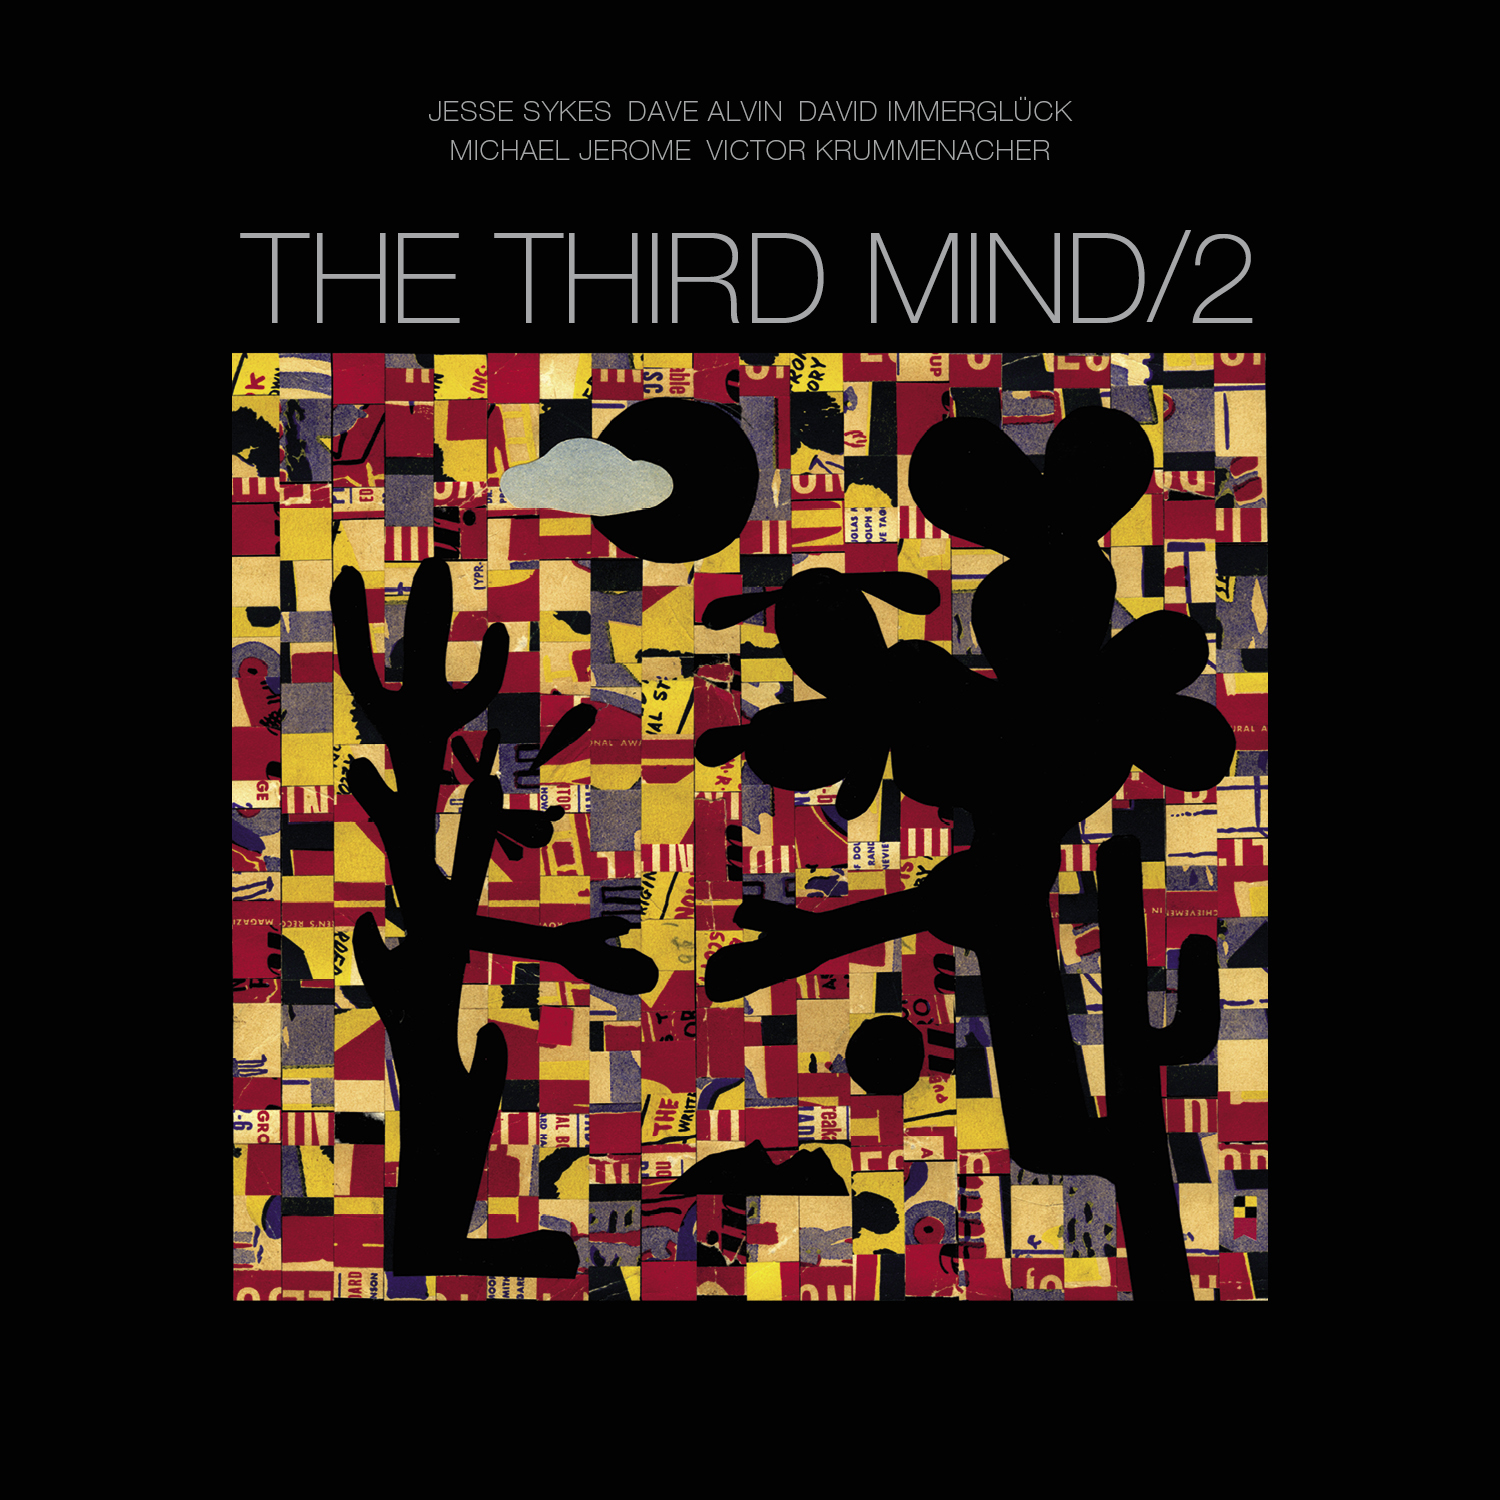 The Third Mind to release second album, The Third Mind 2 on October 27